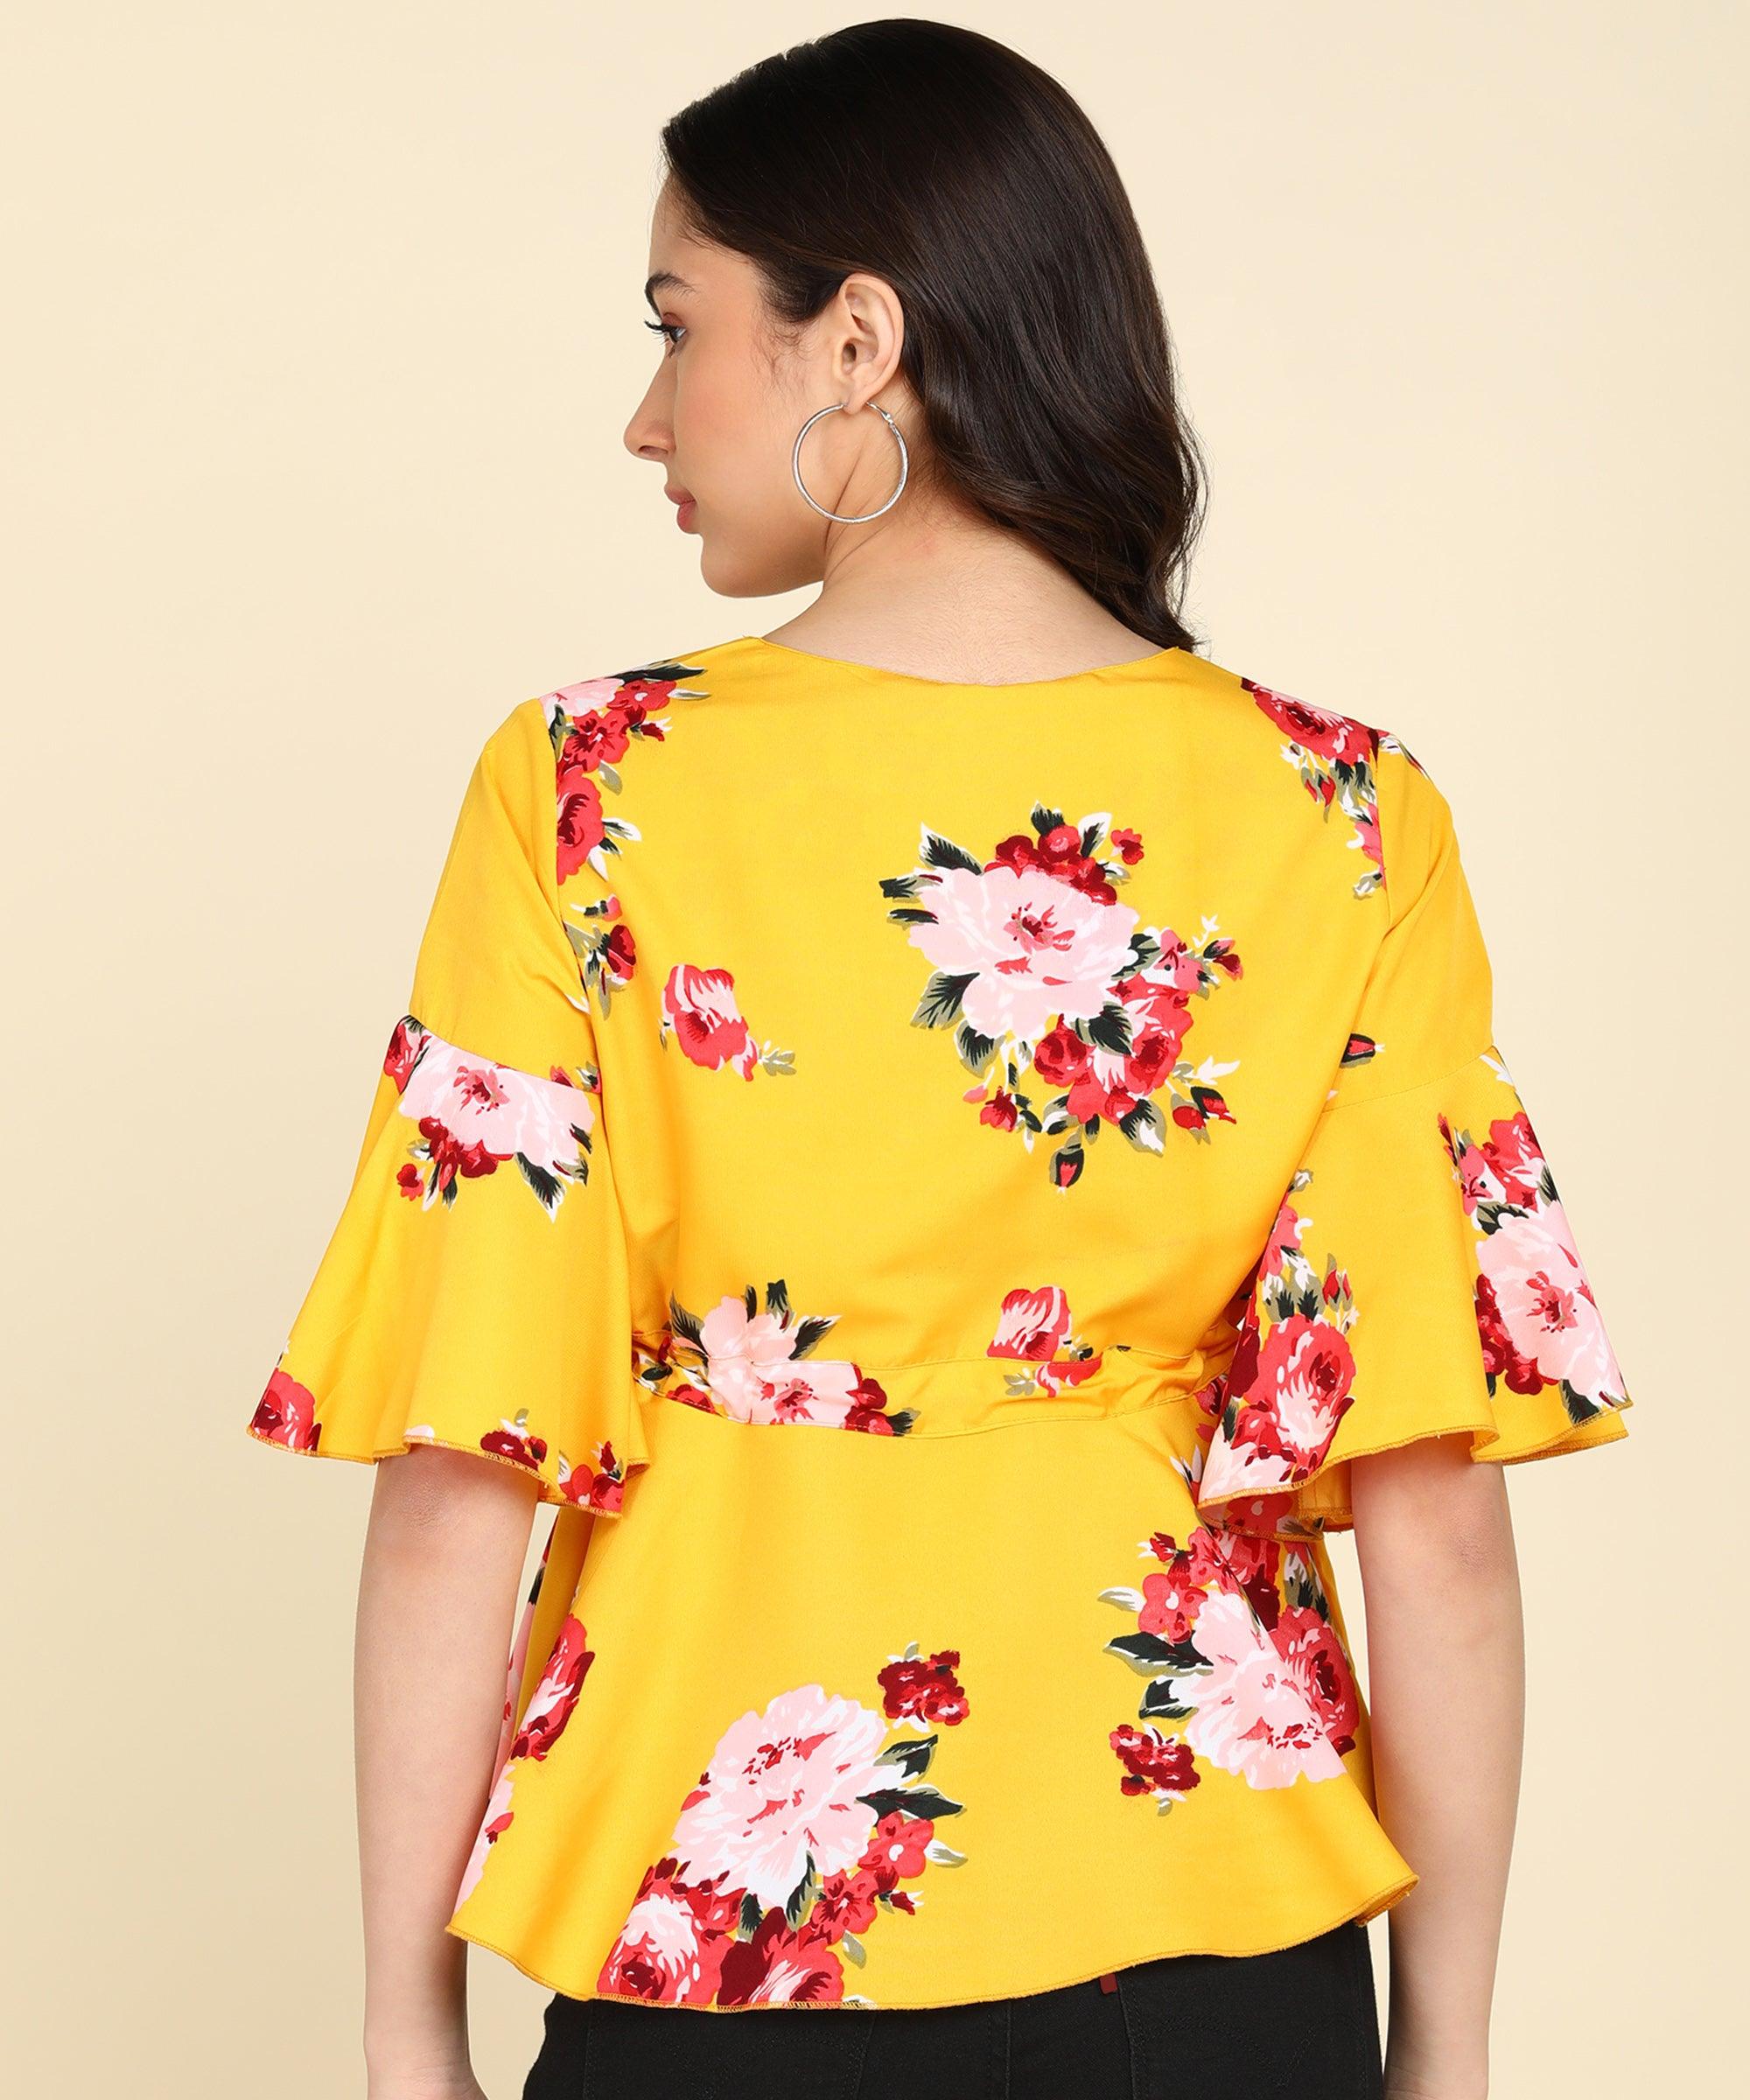 Floral Prinatd Yellow Top - Znxclothing